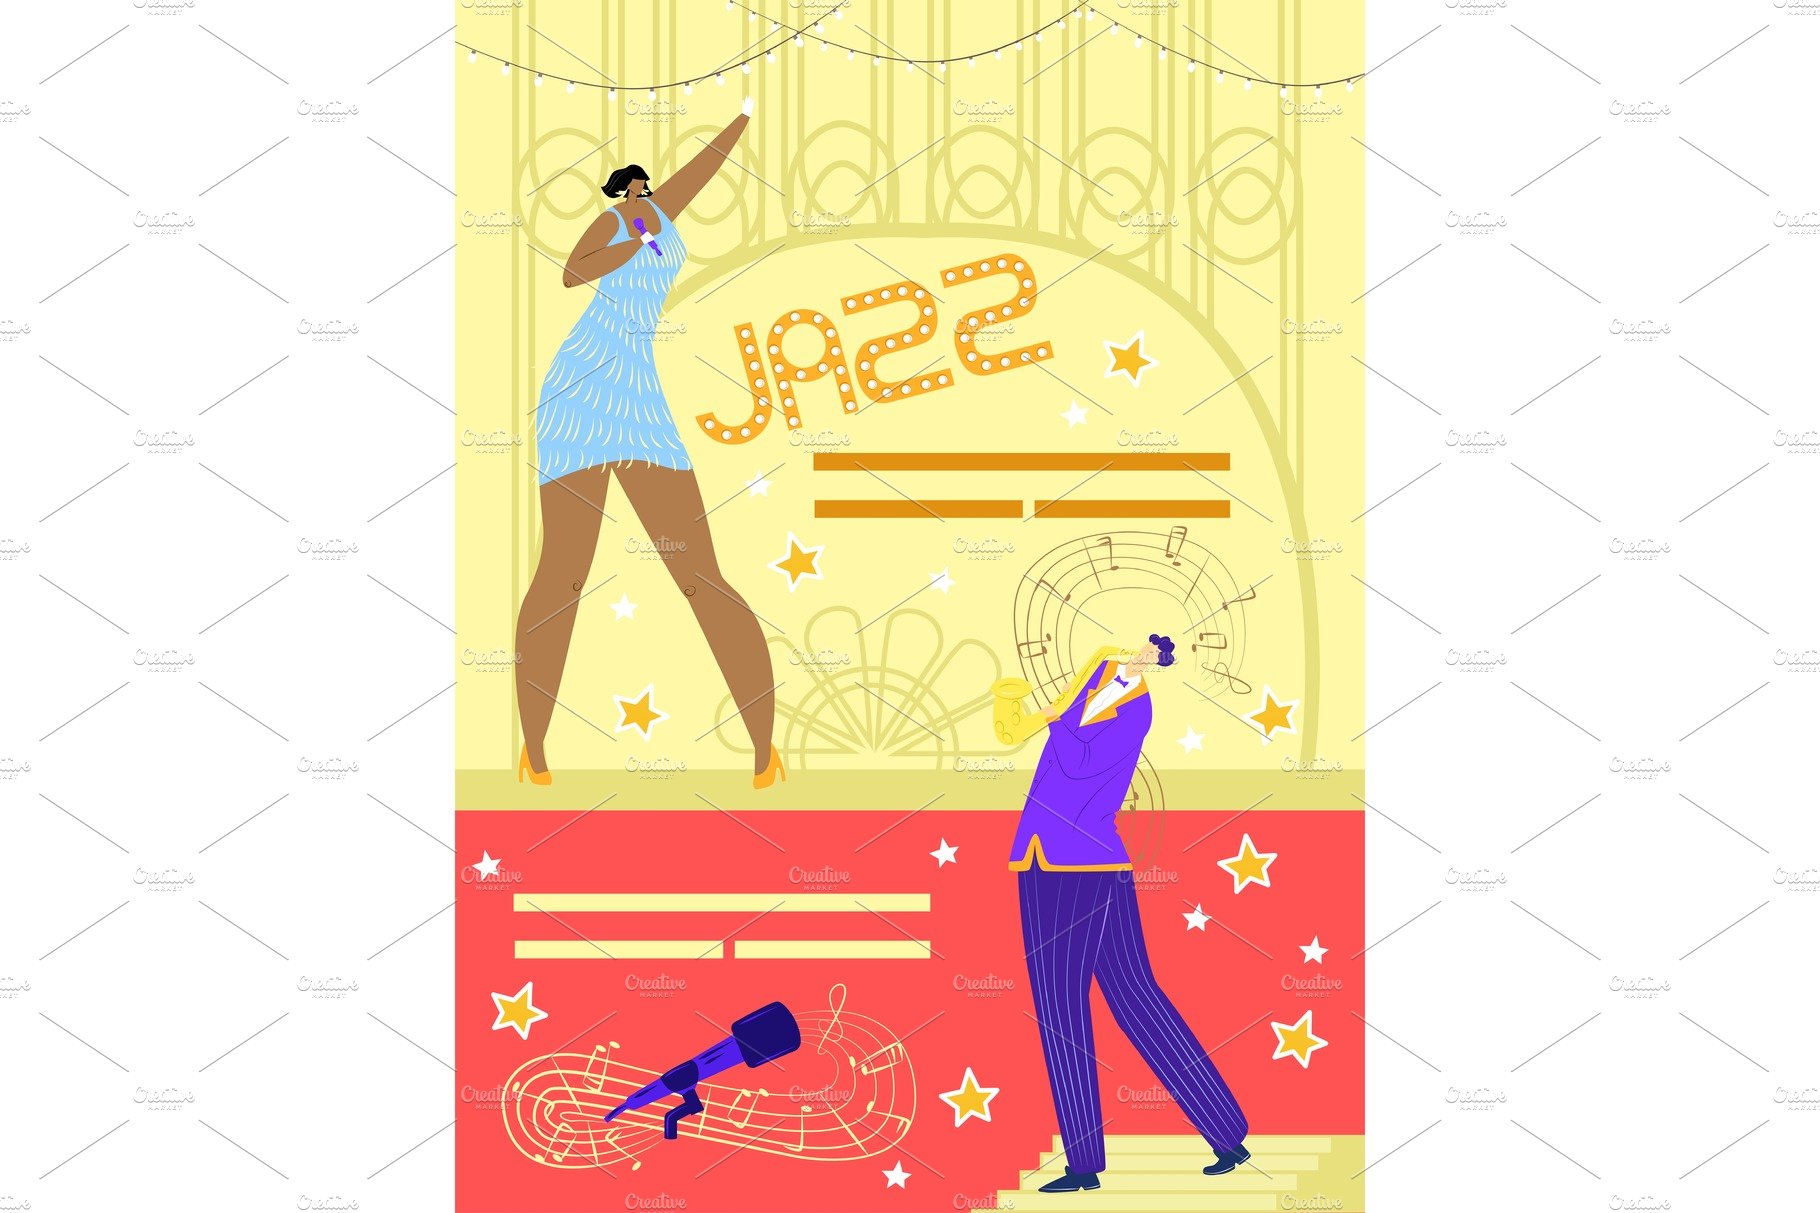 Jazz poster vector illustration cover image.